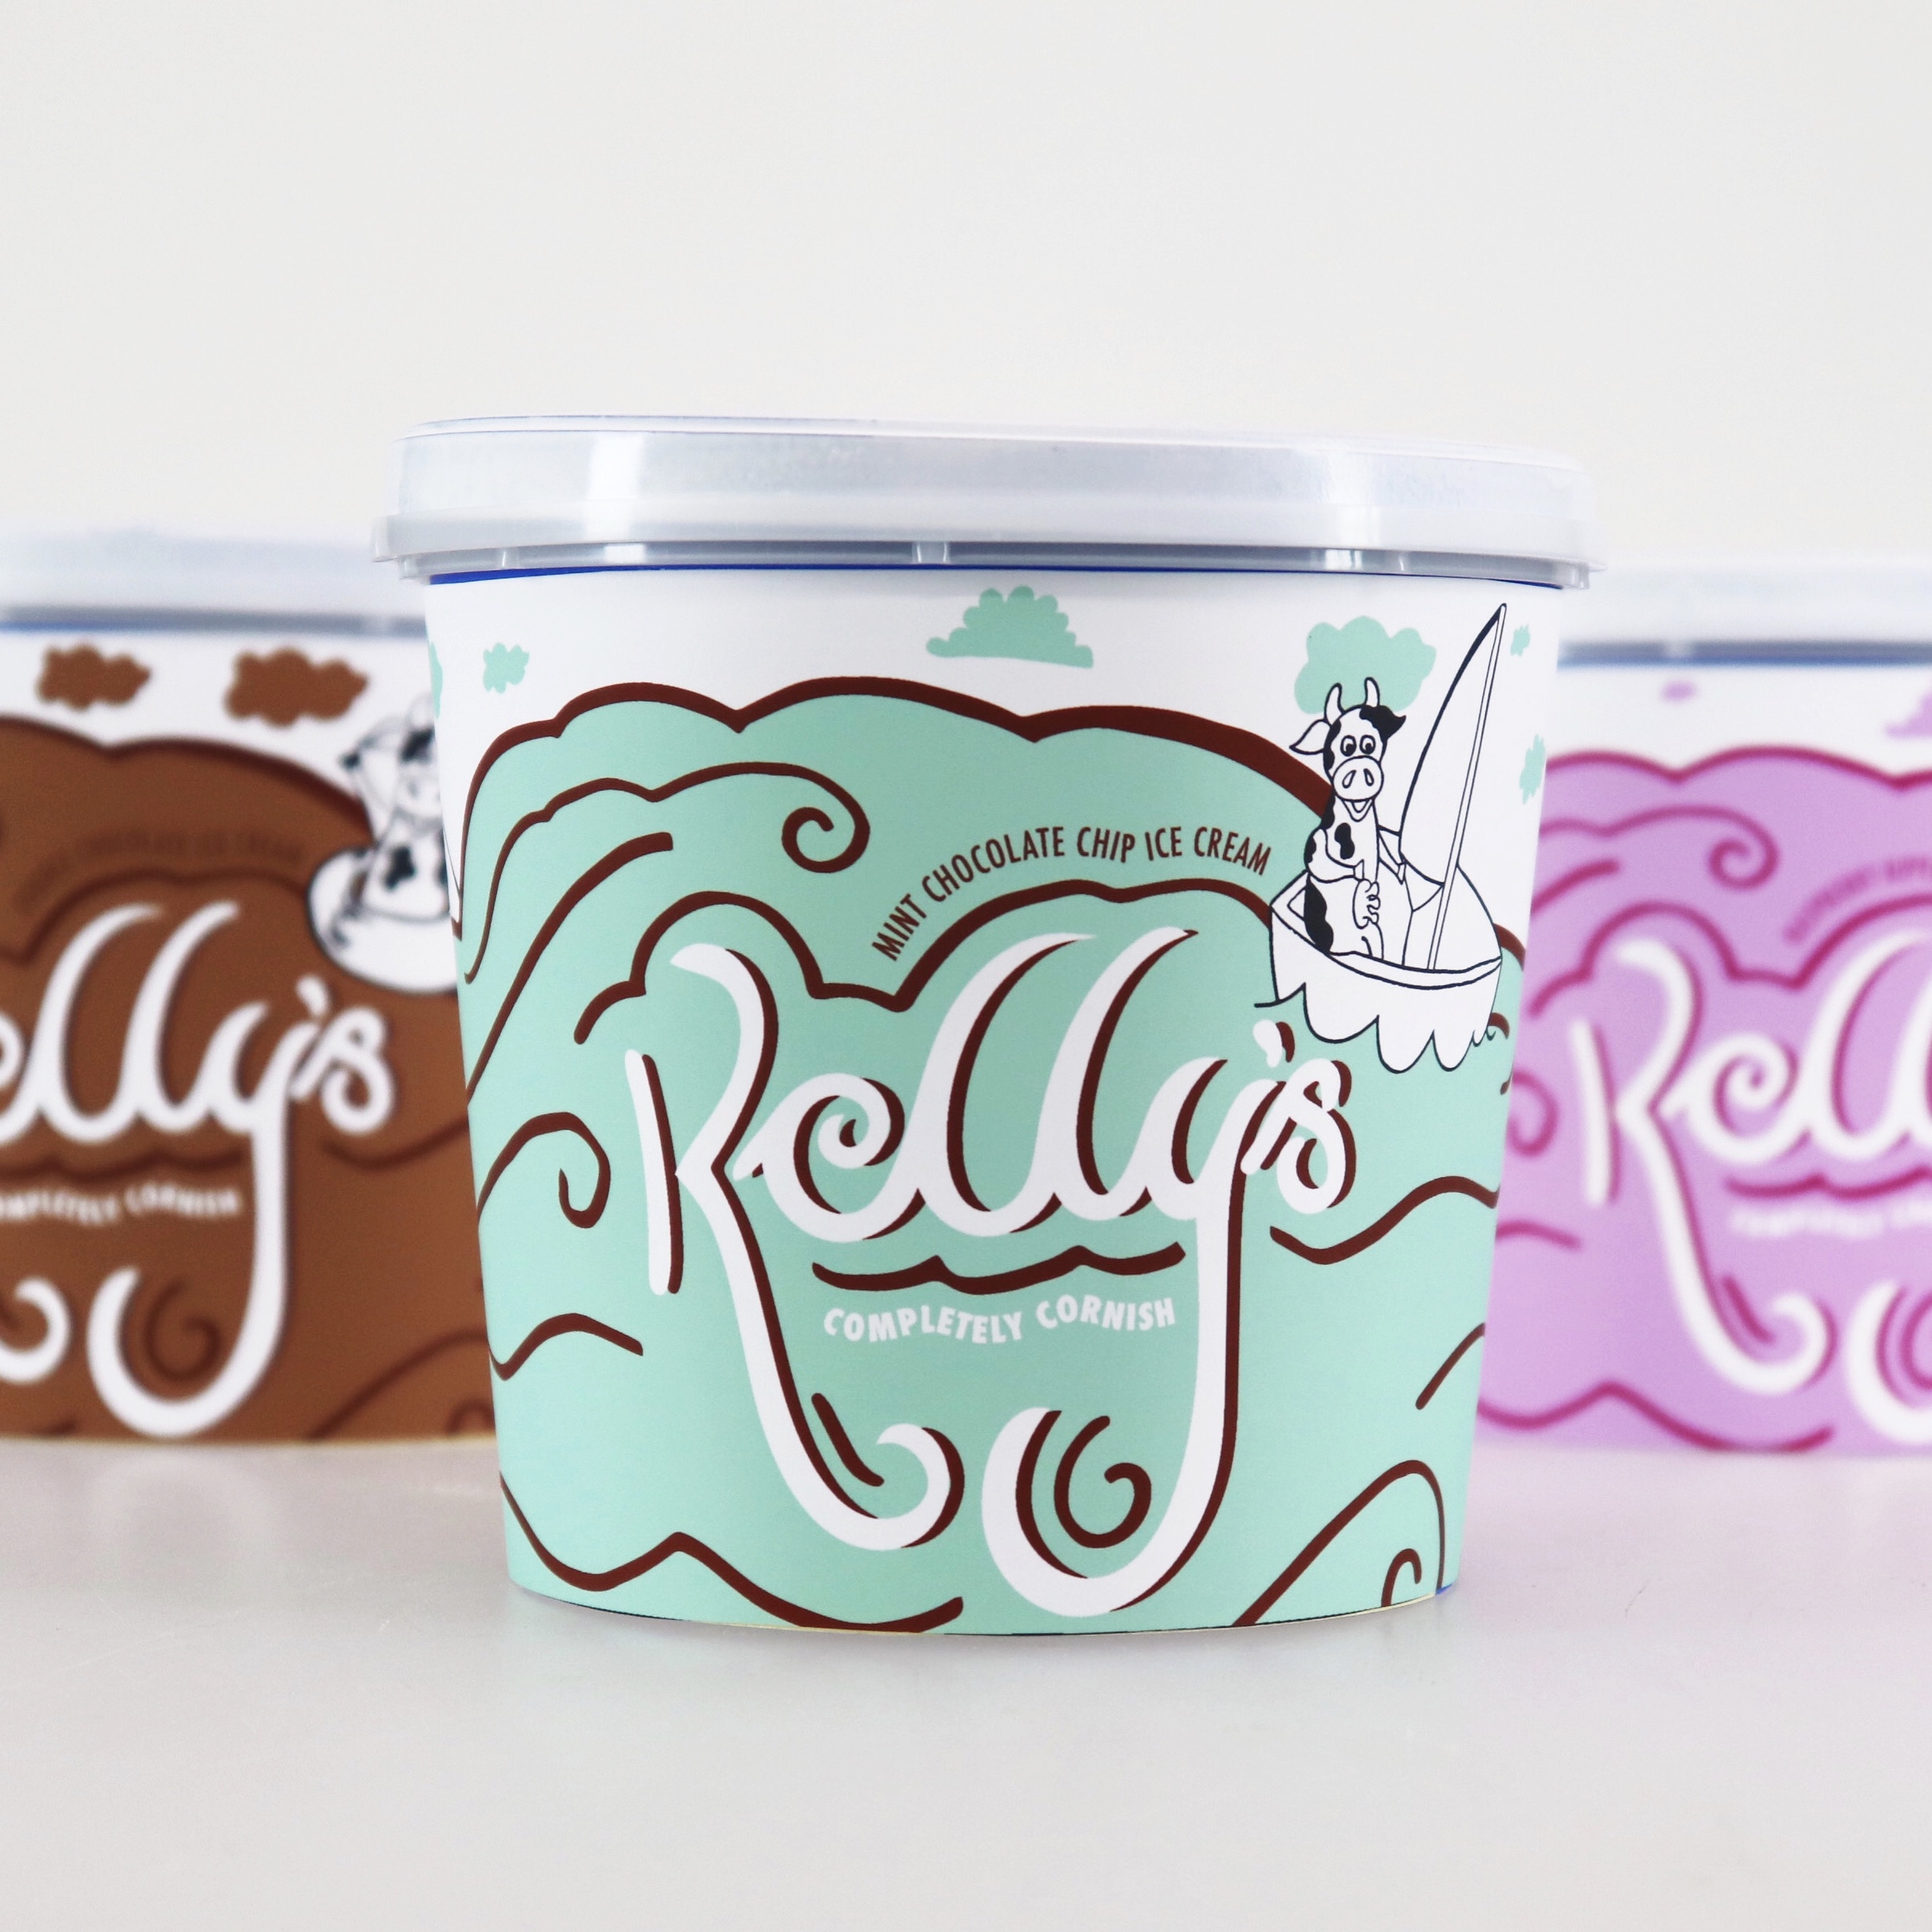 Student Concept Rebrand for Kelly's of Cornwall - World Brand Design ...